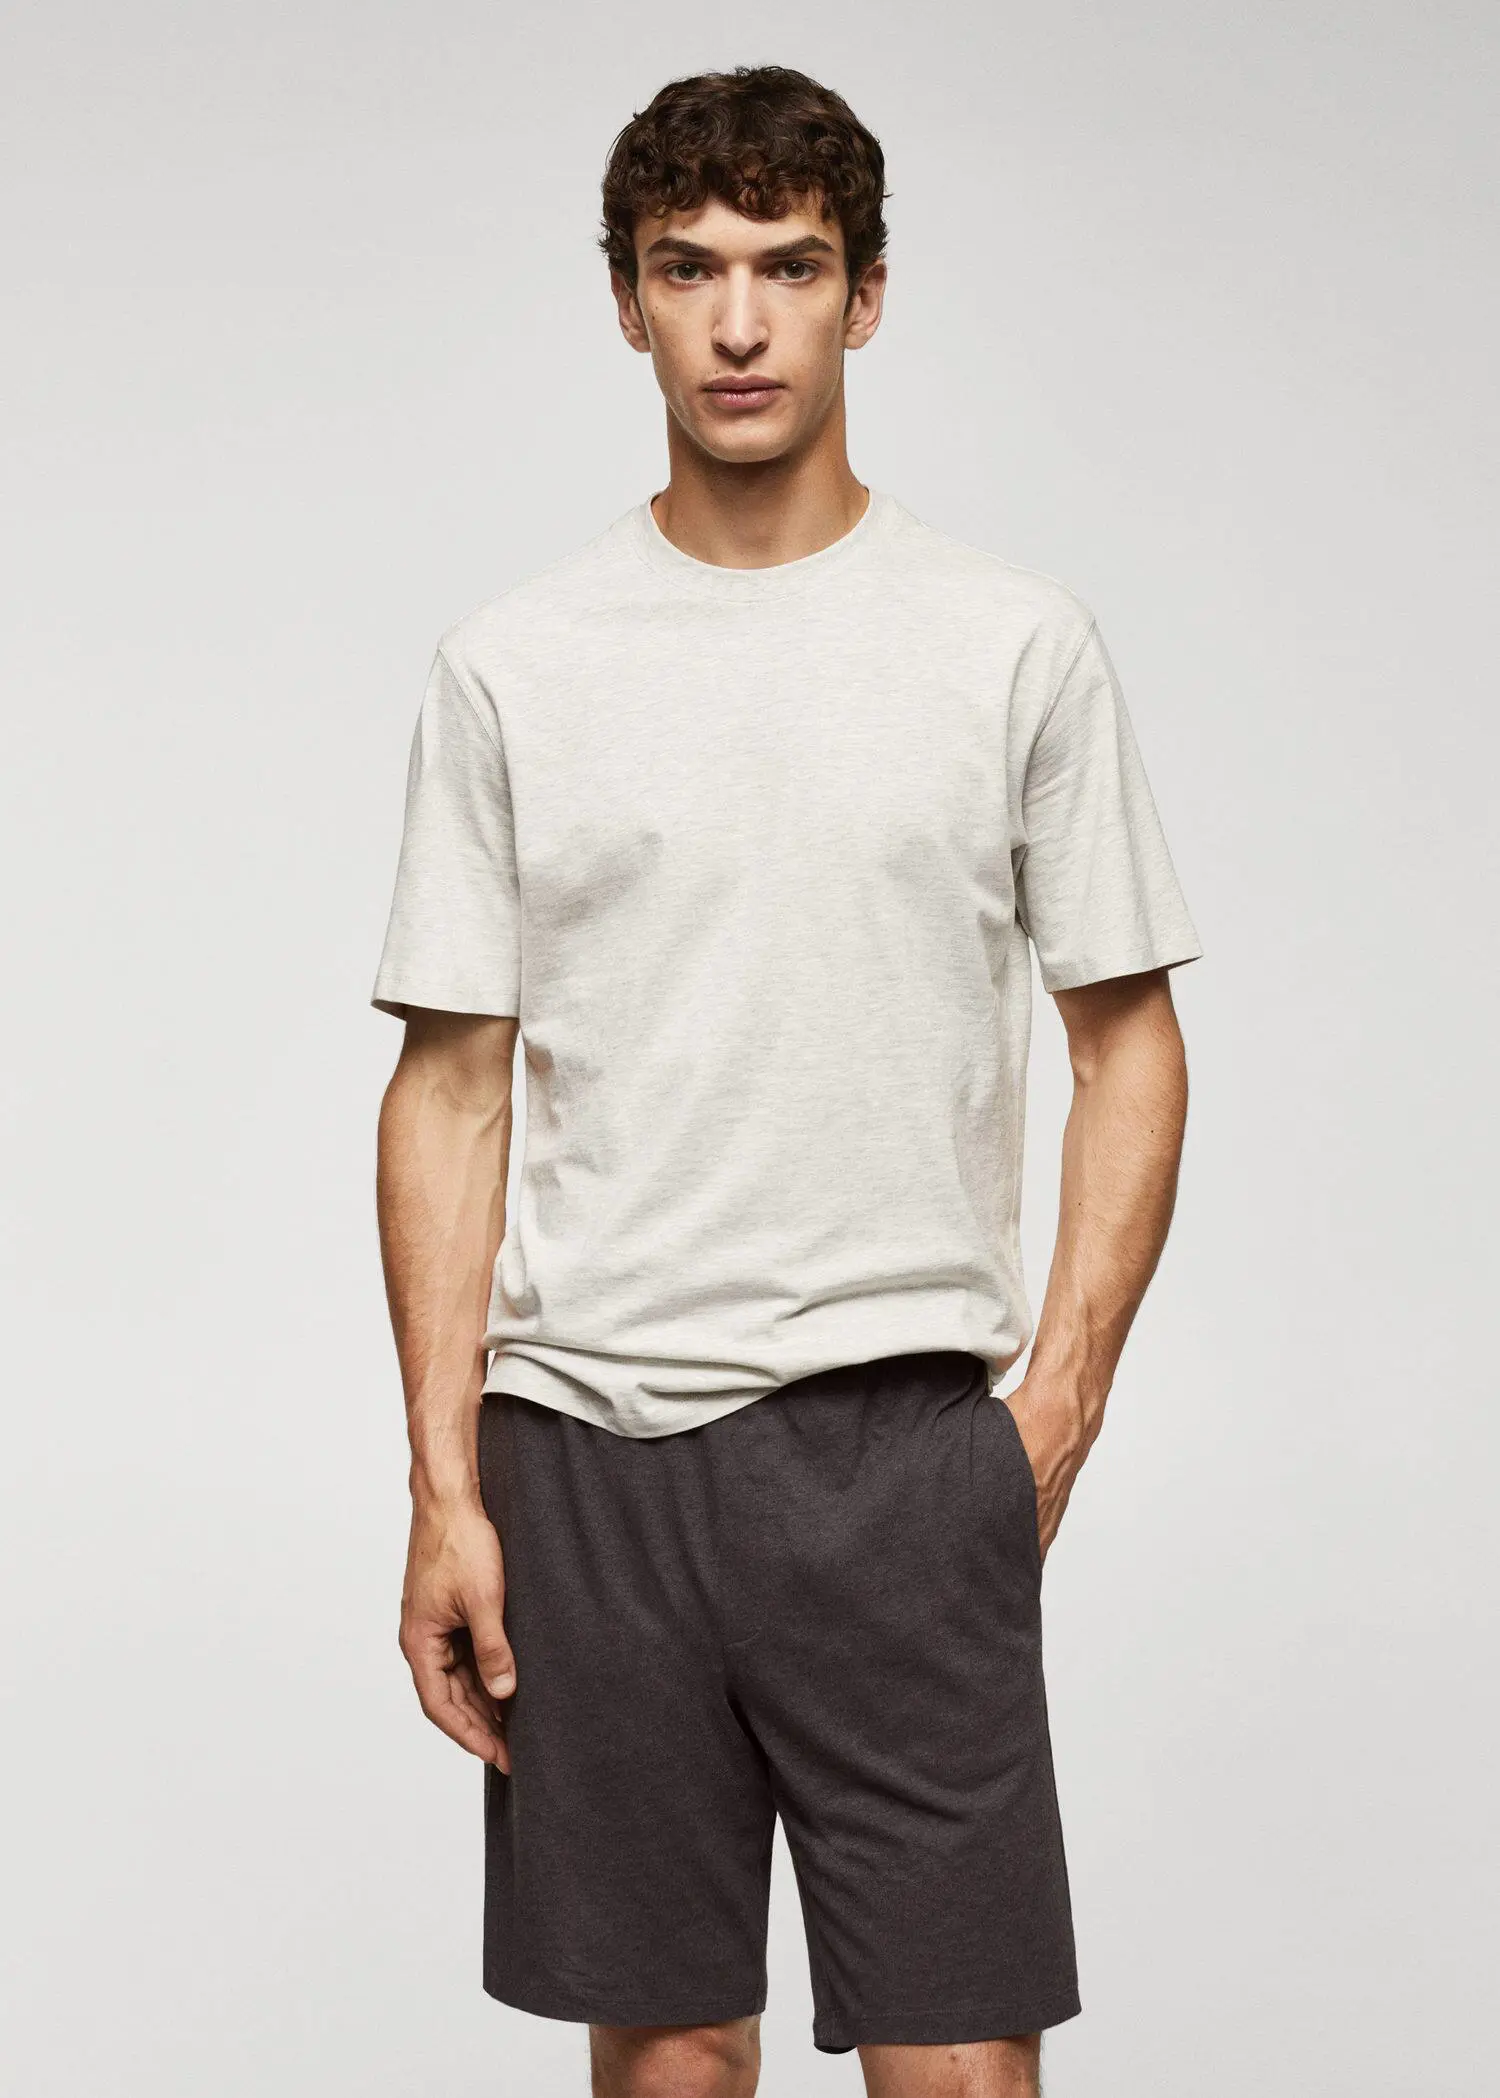 Mango Cotton pajama shorts pack. a man in a white t-shirt is standing with his hands in his pockets 